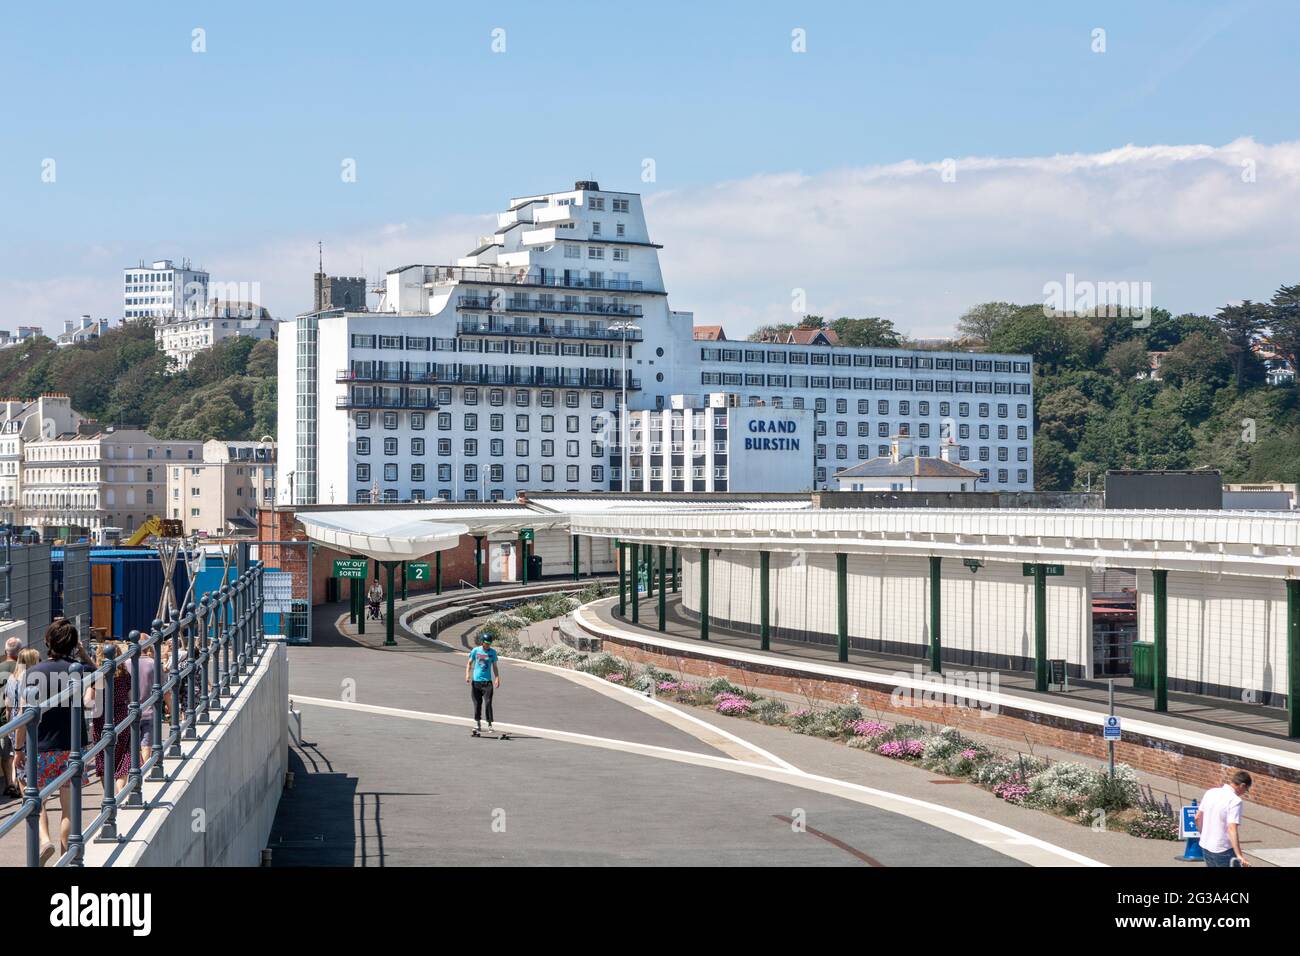 The Grand Burstin Hotel, taken from the Harbour Arm over the old railway station. Folkestone, Kent. Stock Photo